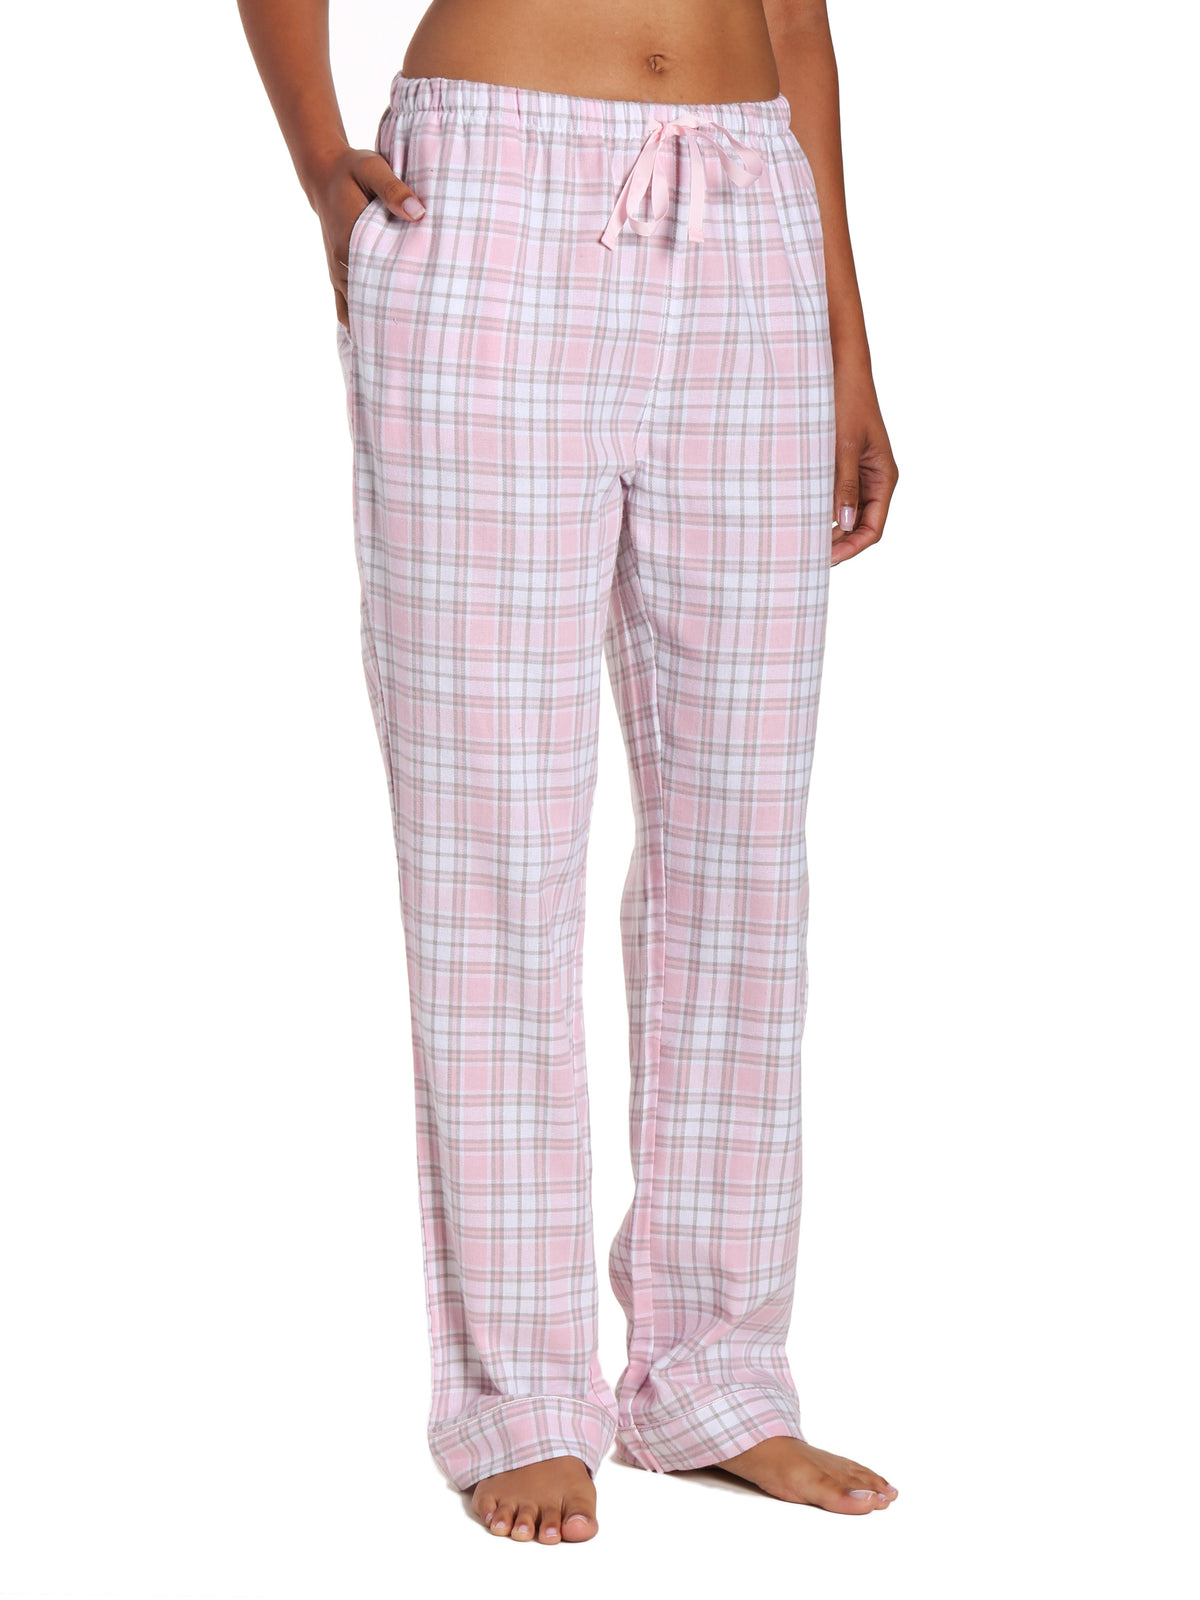 Womens 100% Cotton Lightweight Flannel Lounge Pants - Plaid White-Pink